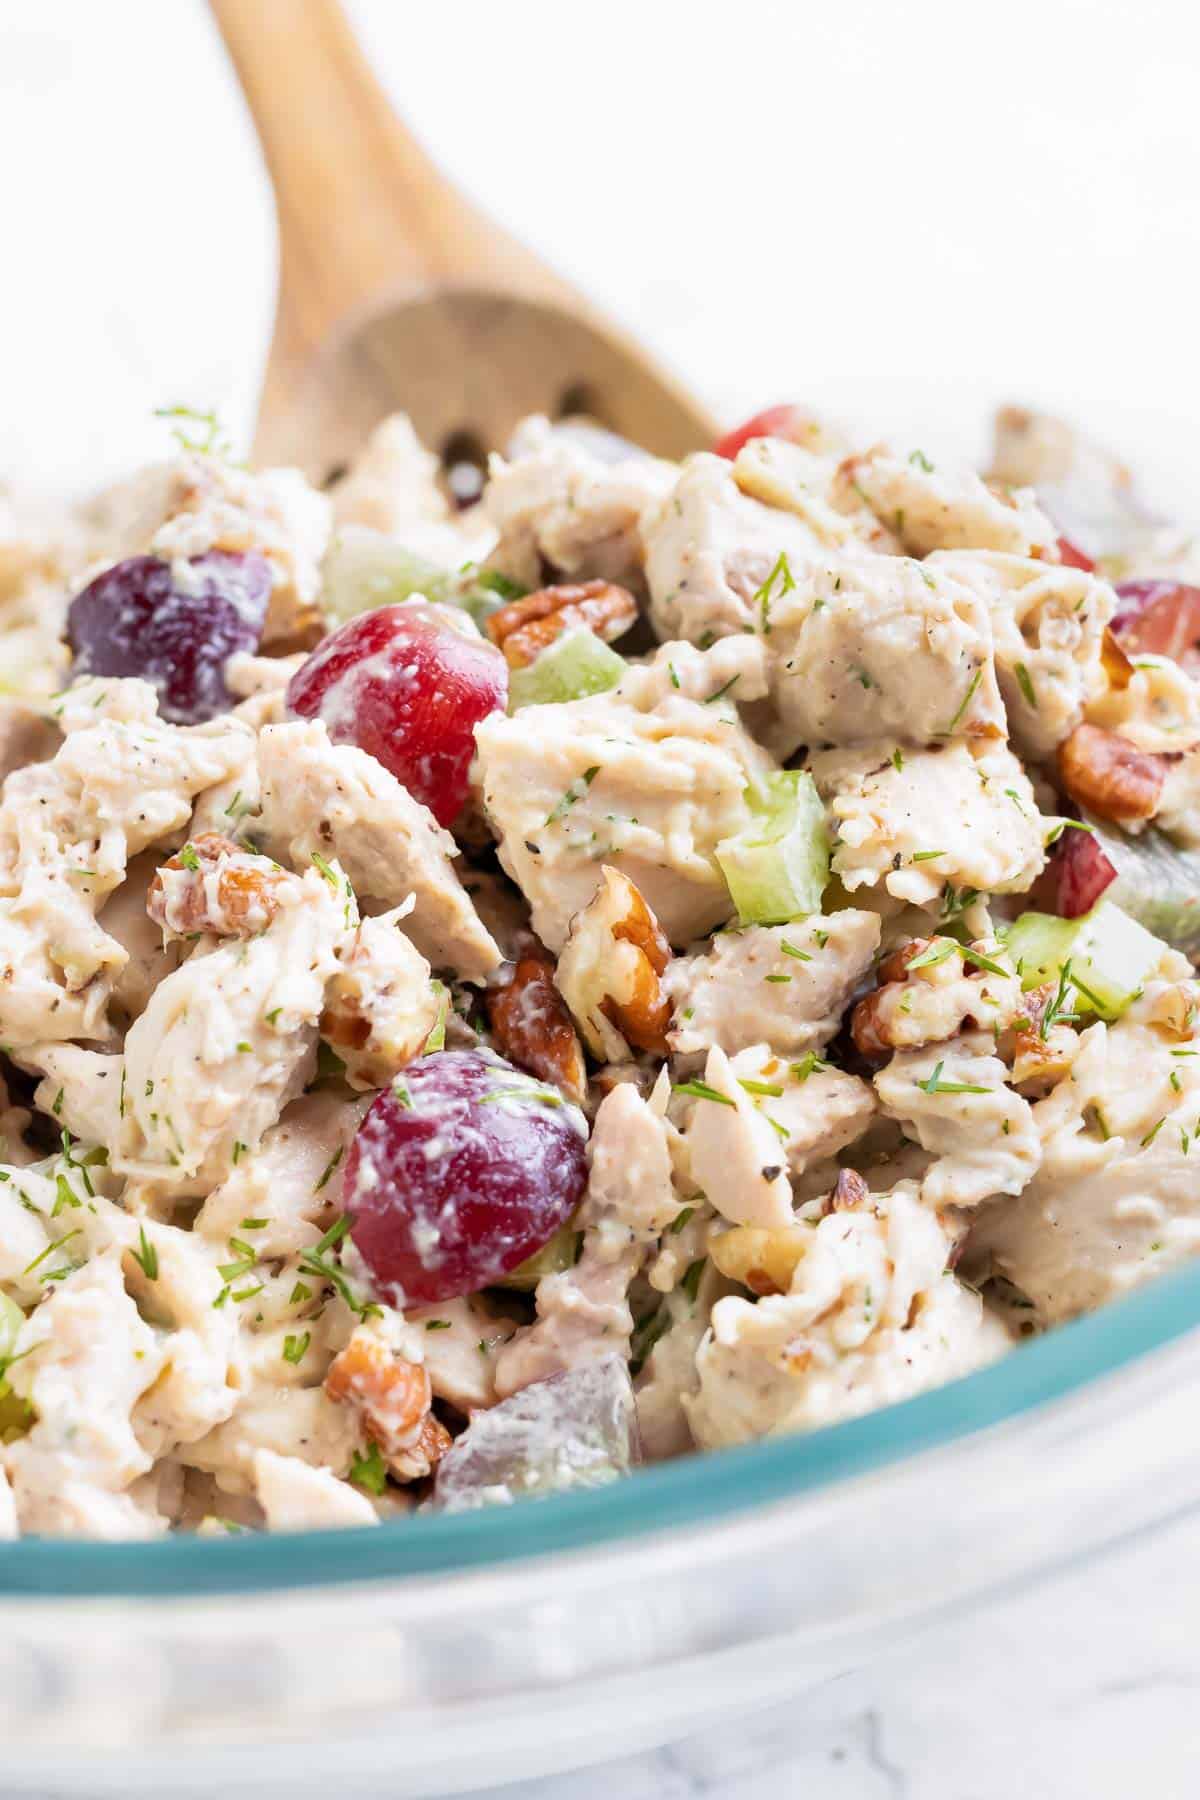 Healthy chicken salad with grapes in a clear glass bowl with a wooden spoon.